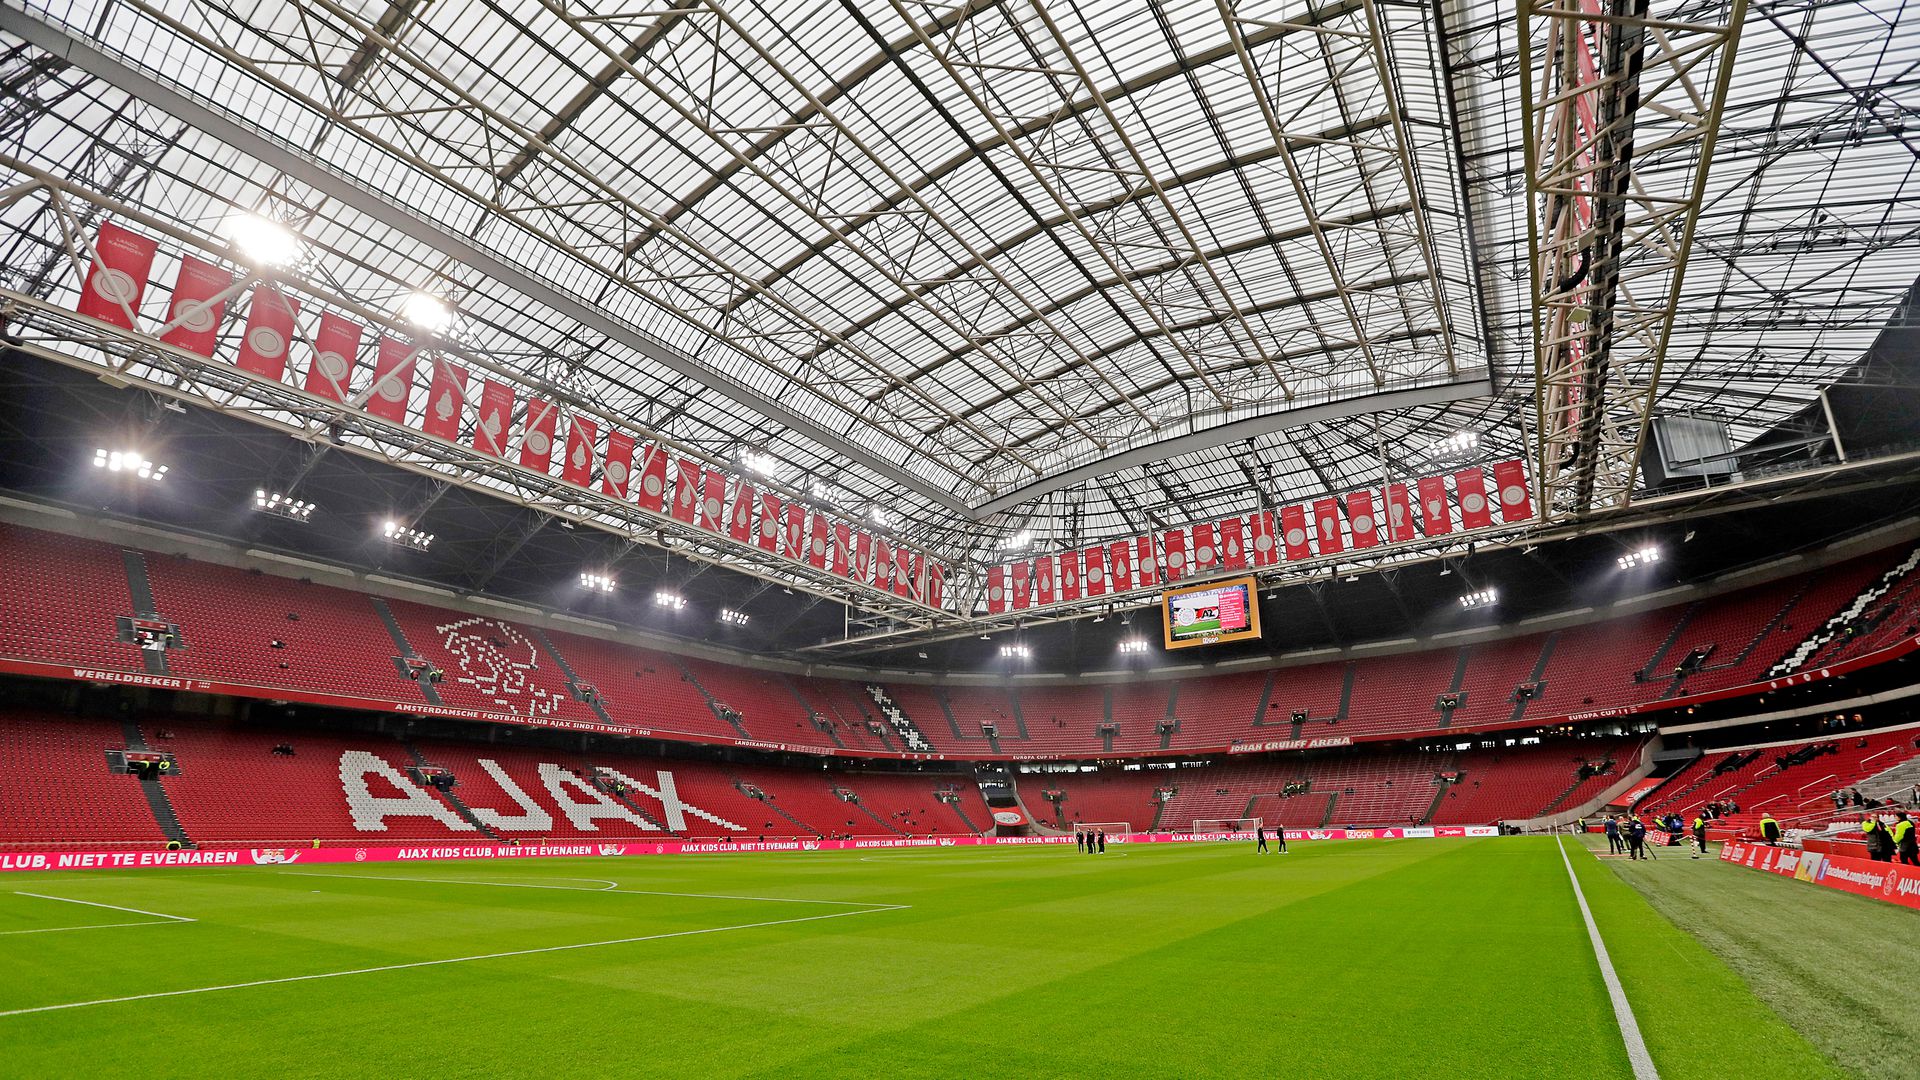 Storage system in Amsterdam stadium shows potential for used batteries